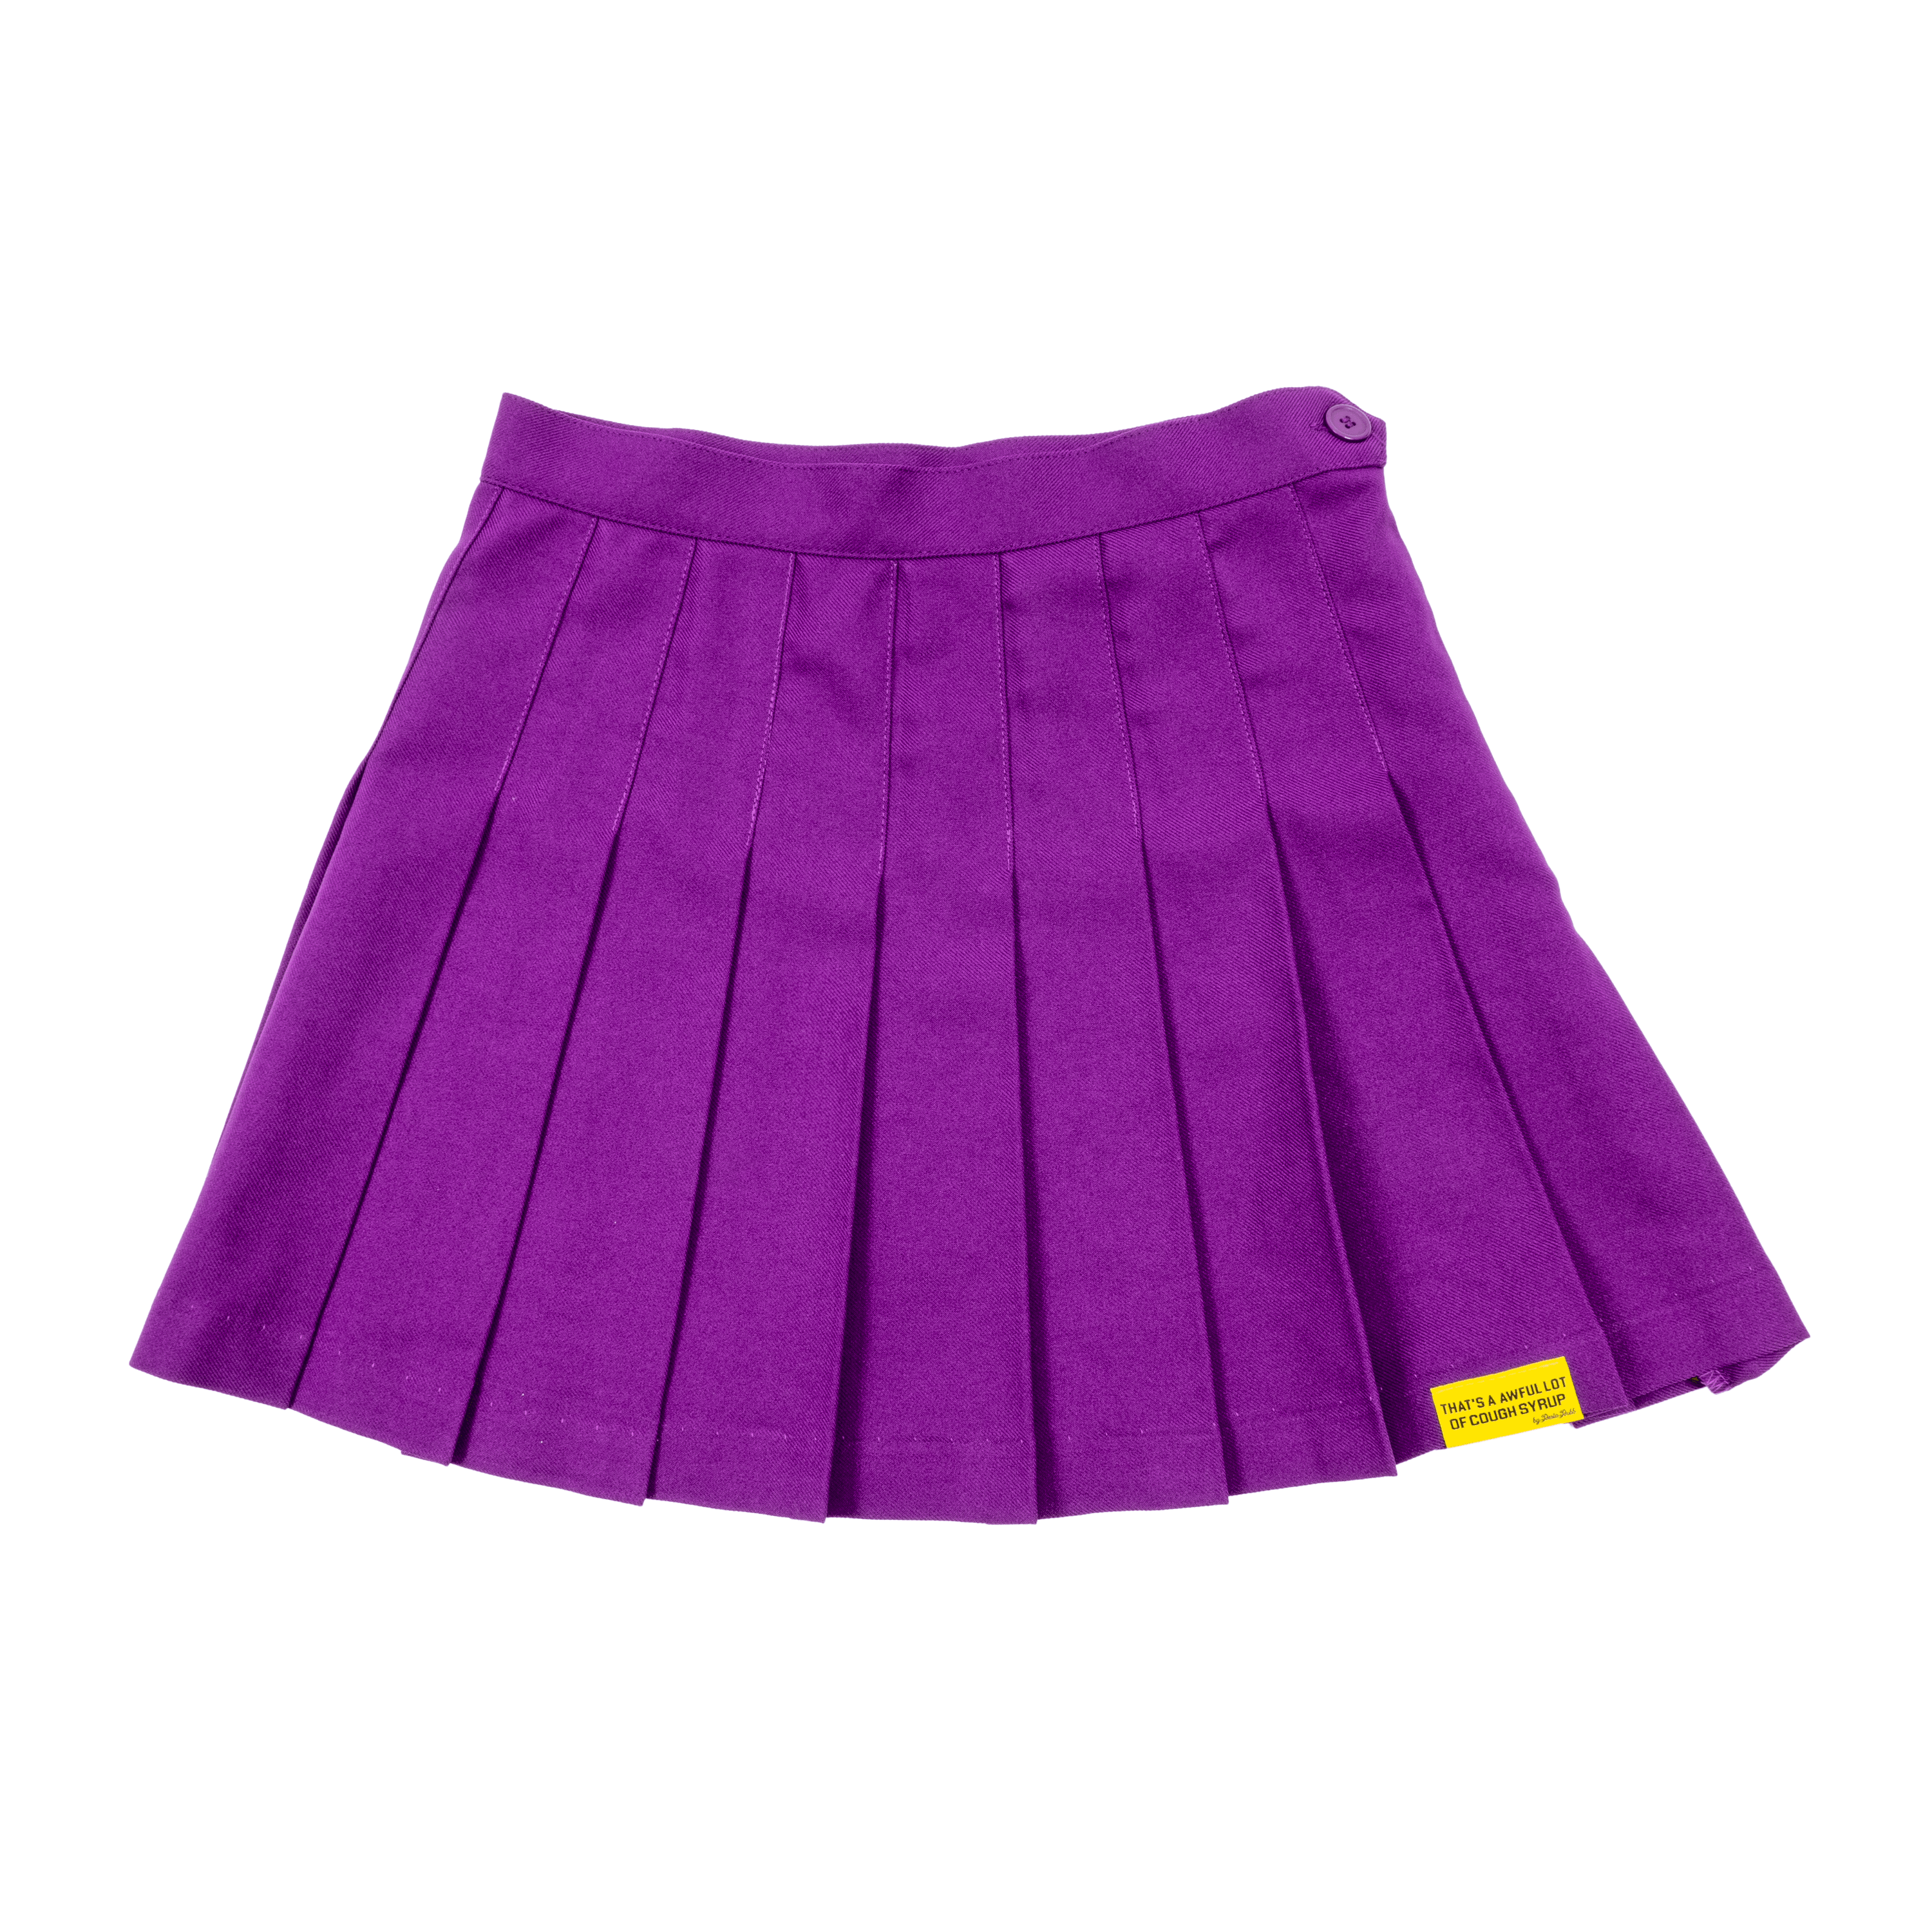 Women's Cough Syrup Skirt By Desto Dubb